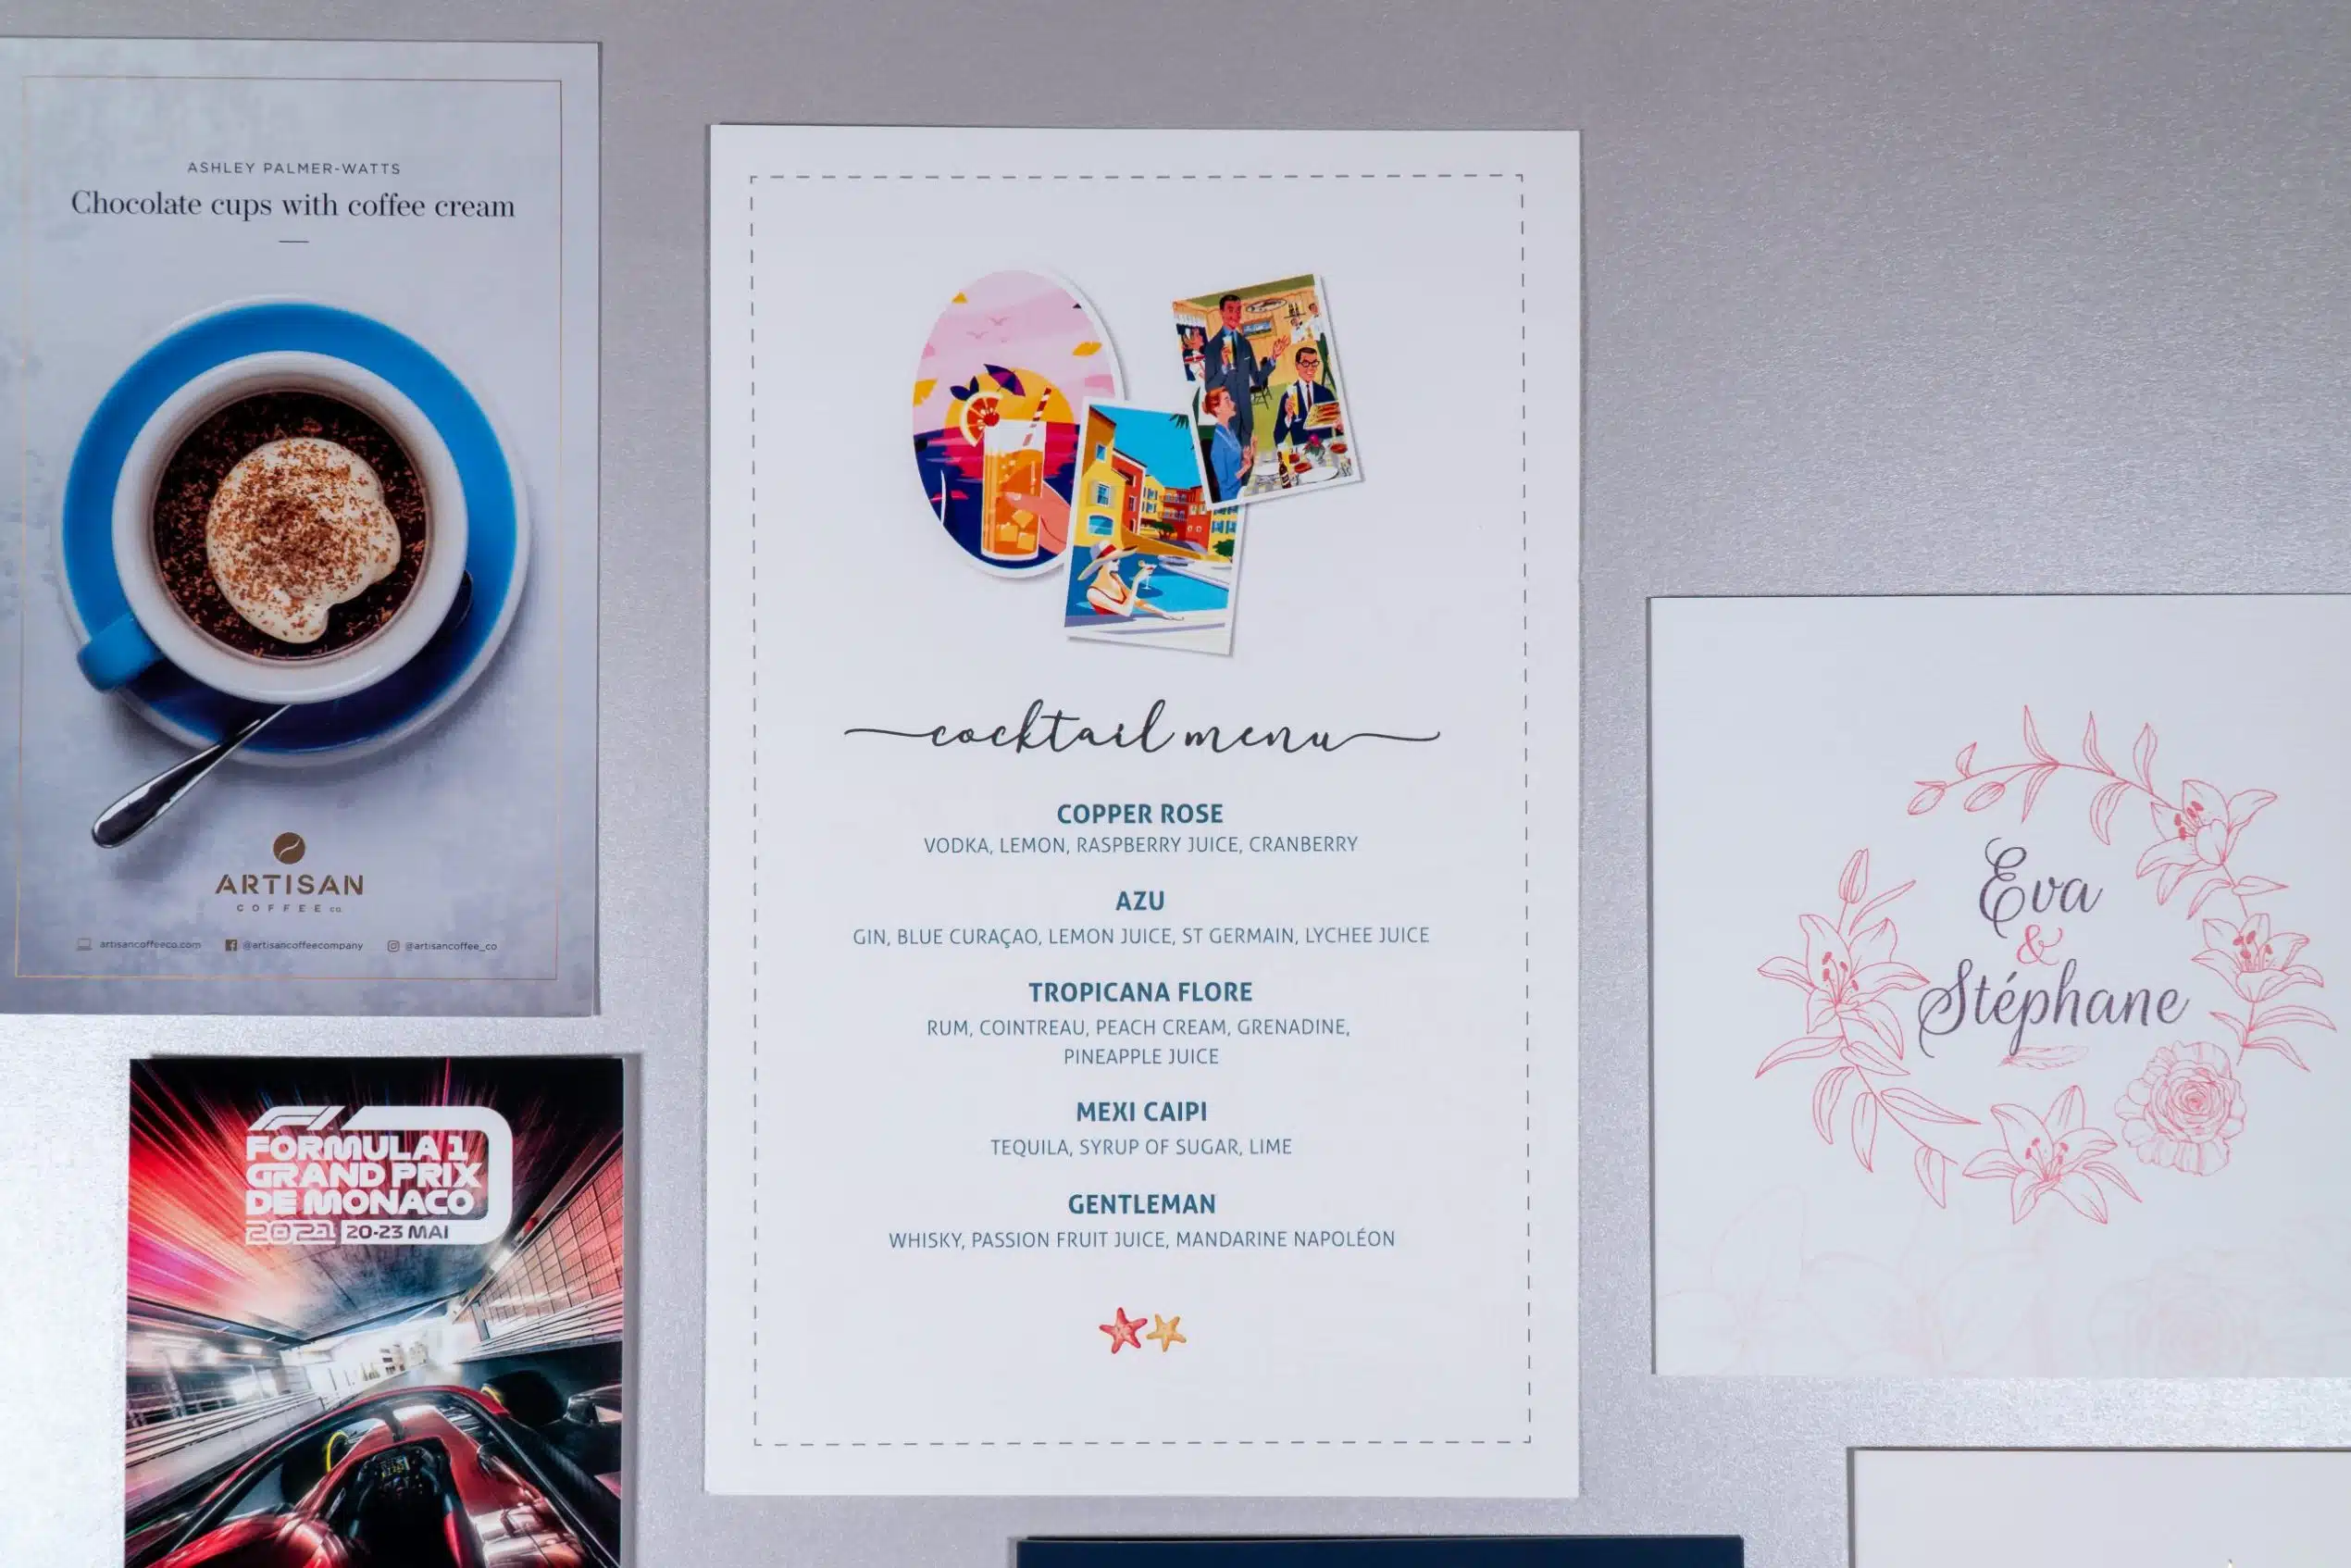 Print Package for Restaurants featured image